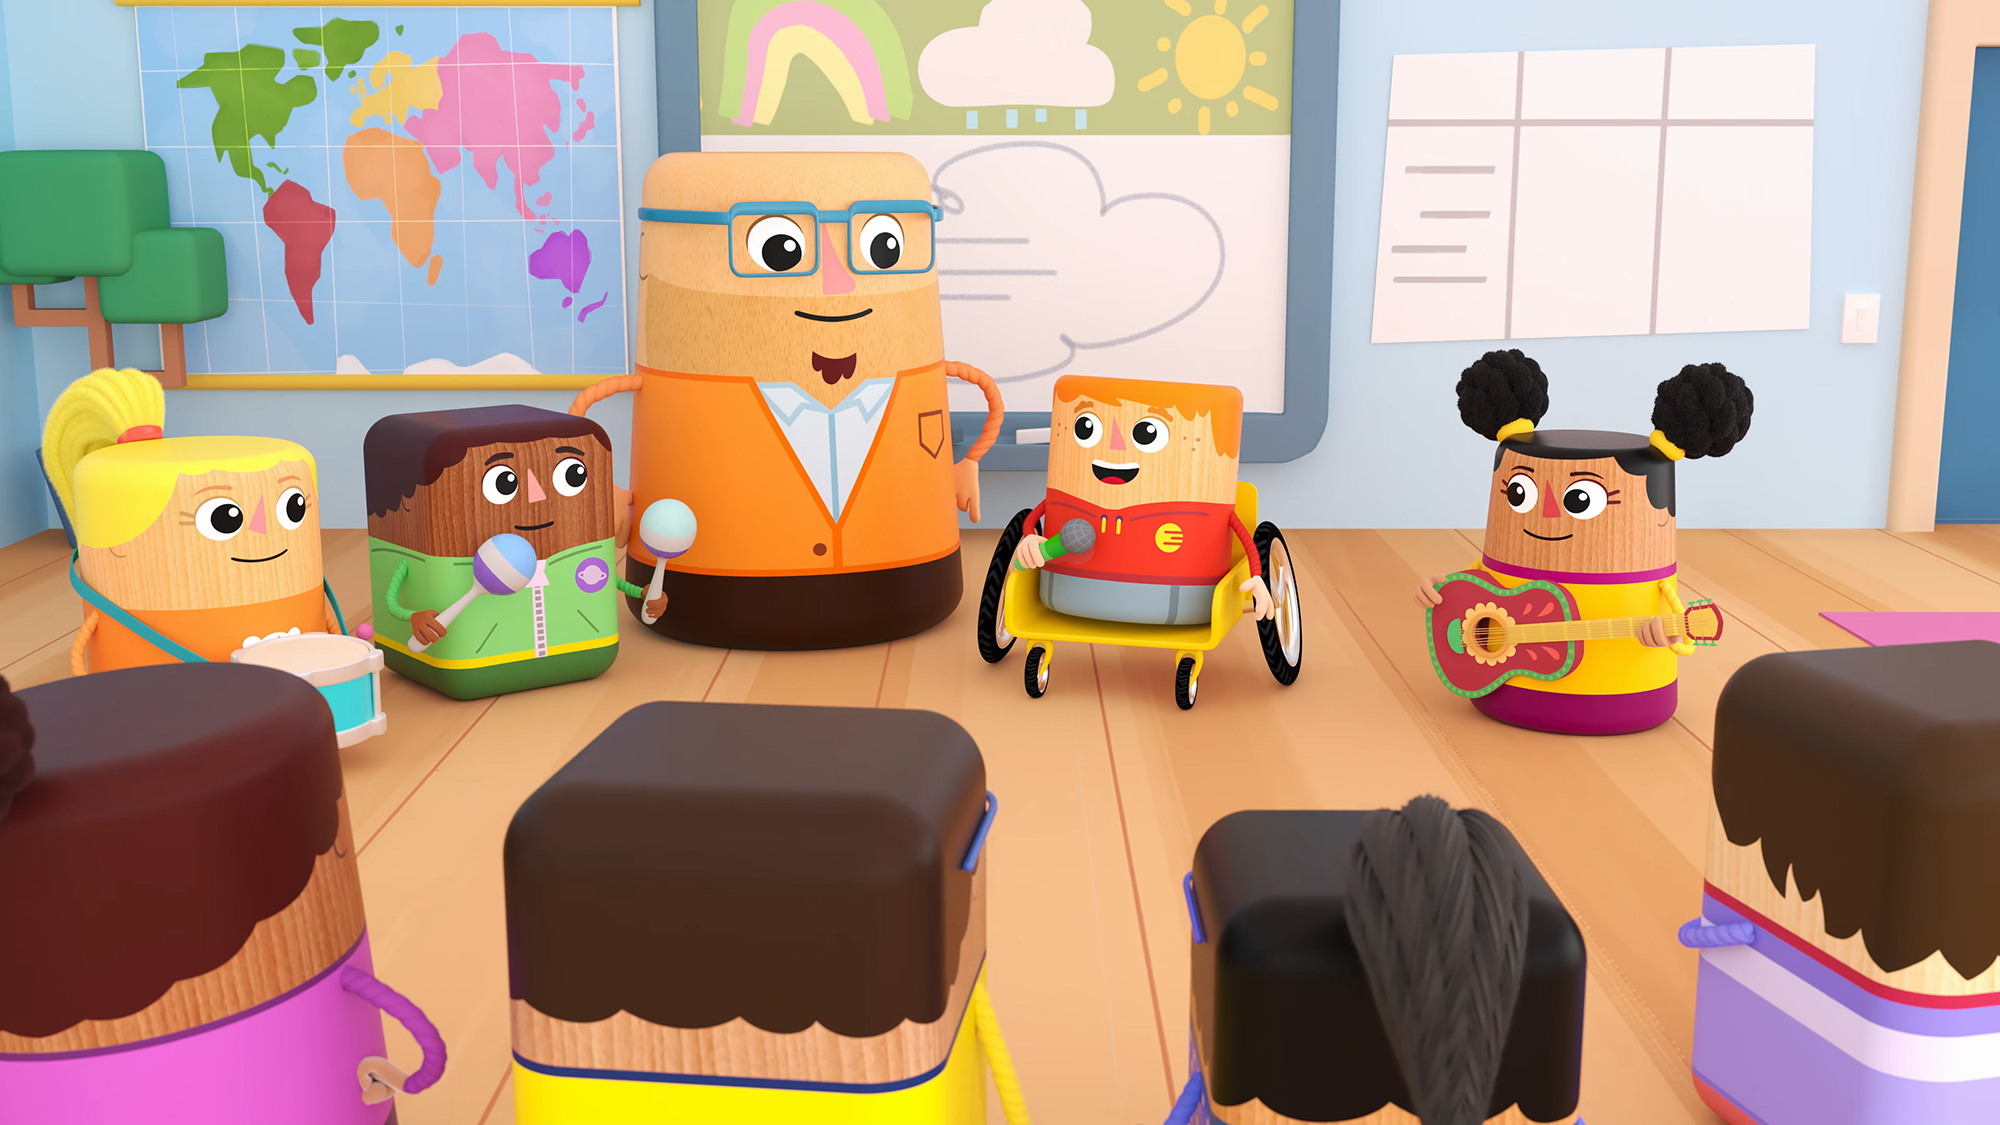 Bea's block characters in a classroom.